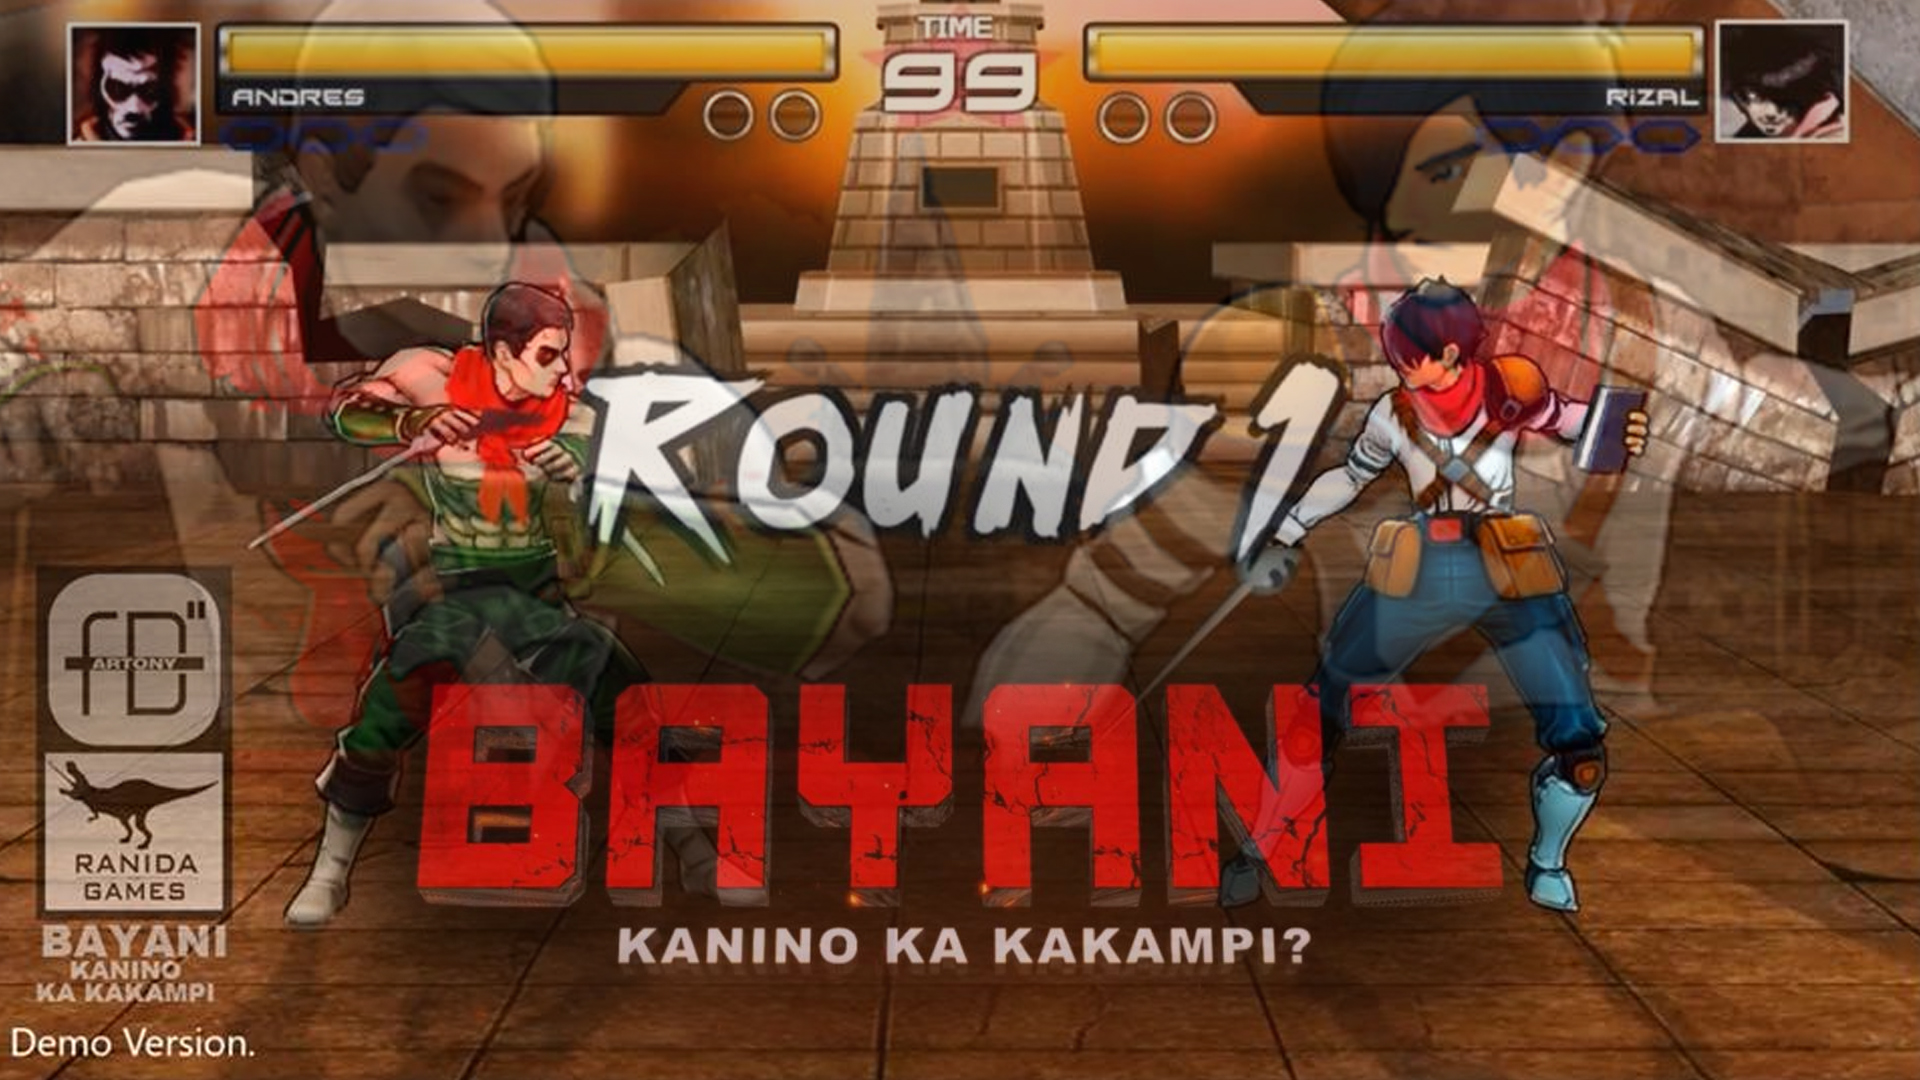 BAYANI – Fighting Game by Indie Game Developer